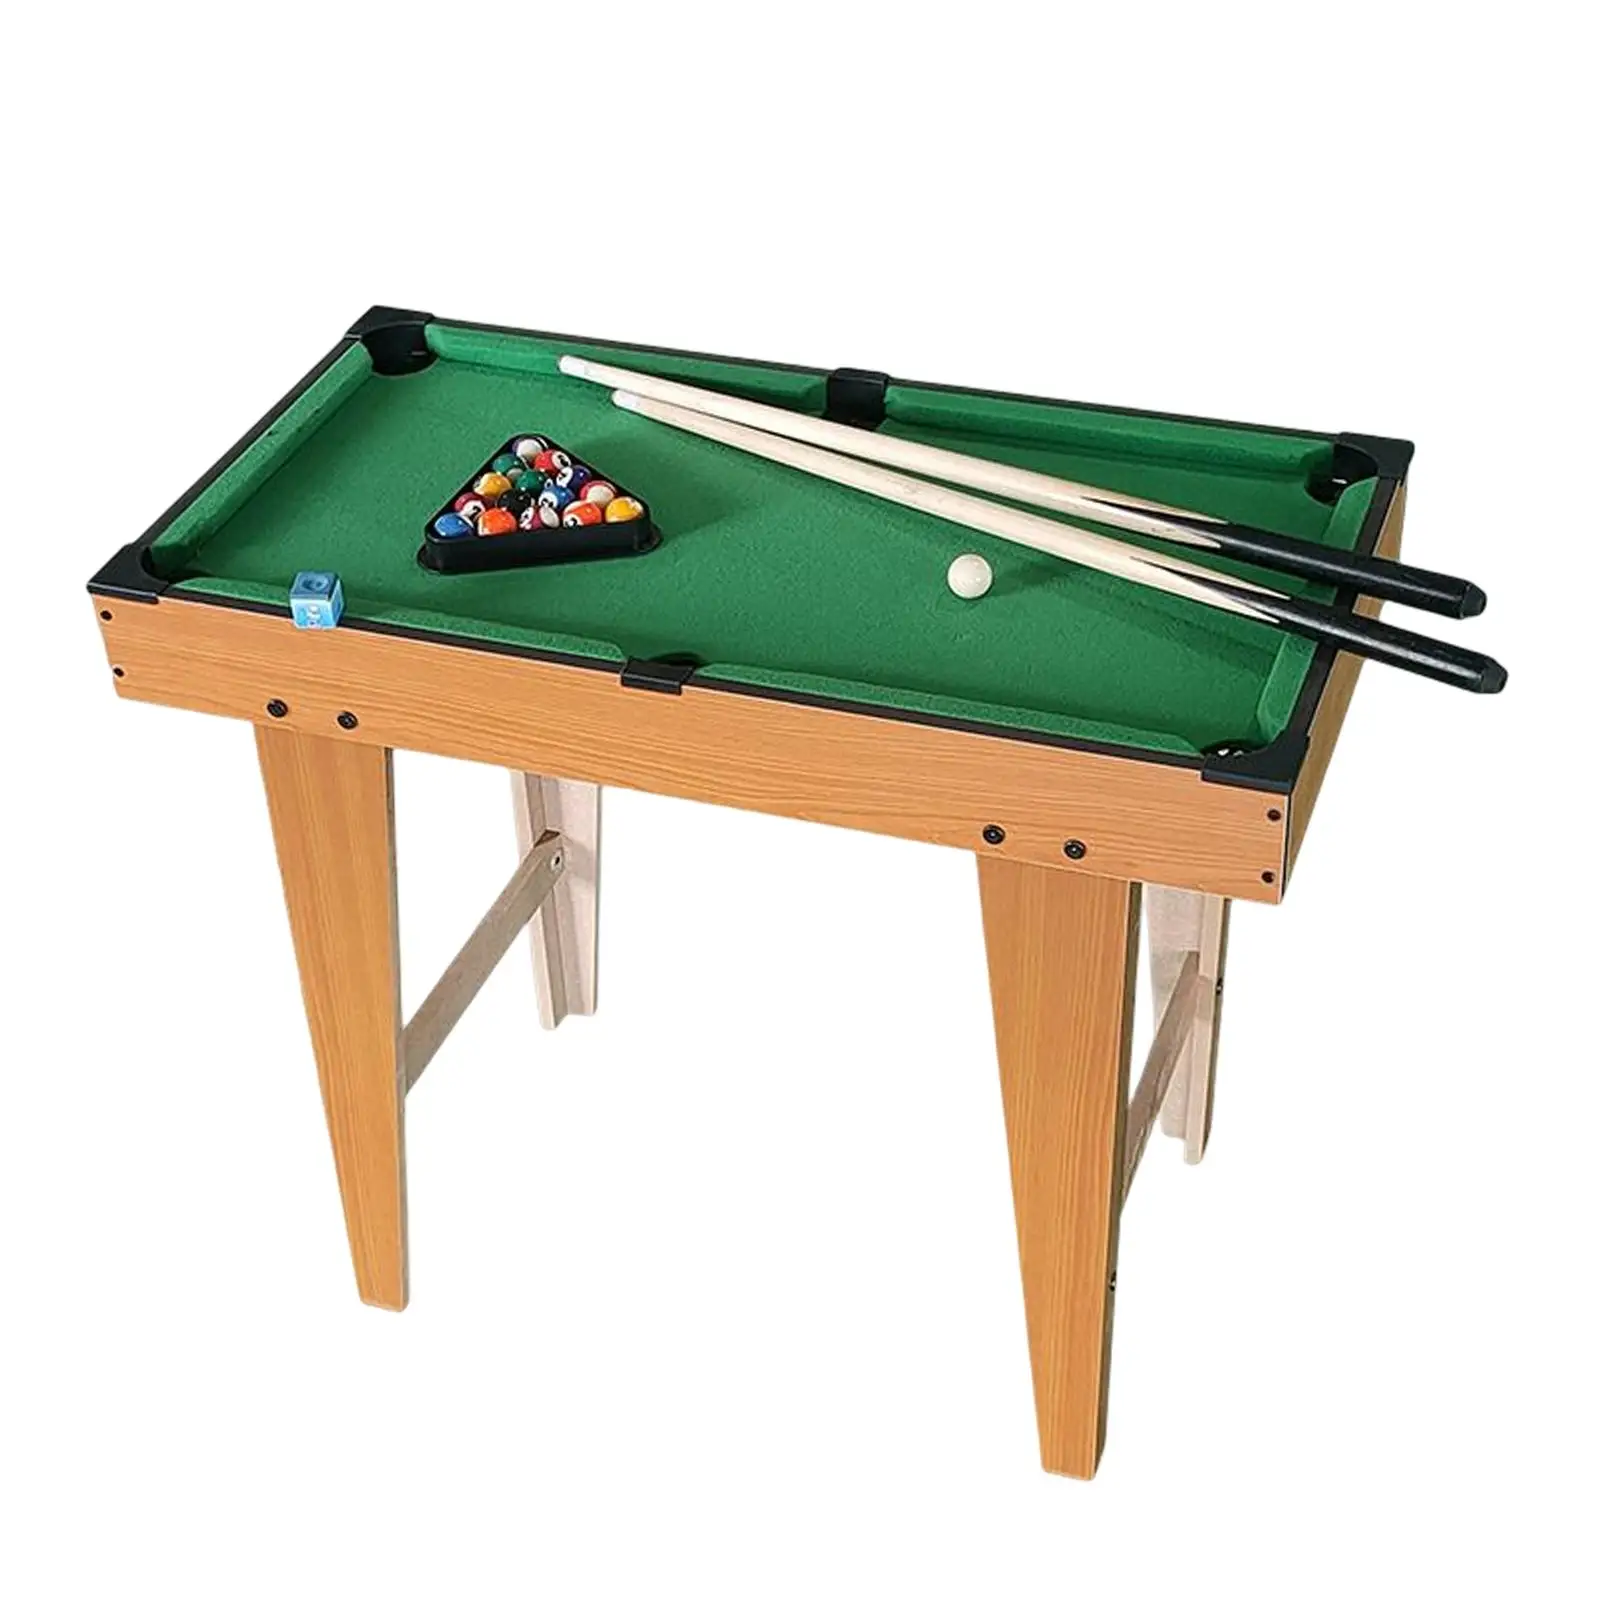 Pool Table Set Home Office Use Board Games Interaction Toys Wooden 15 Colorful